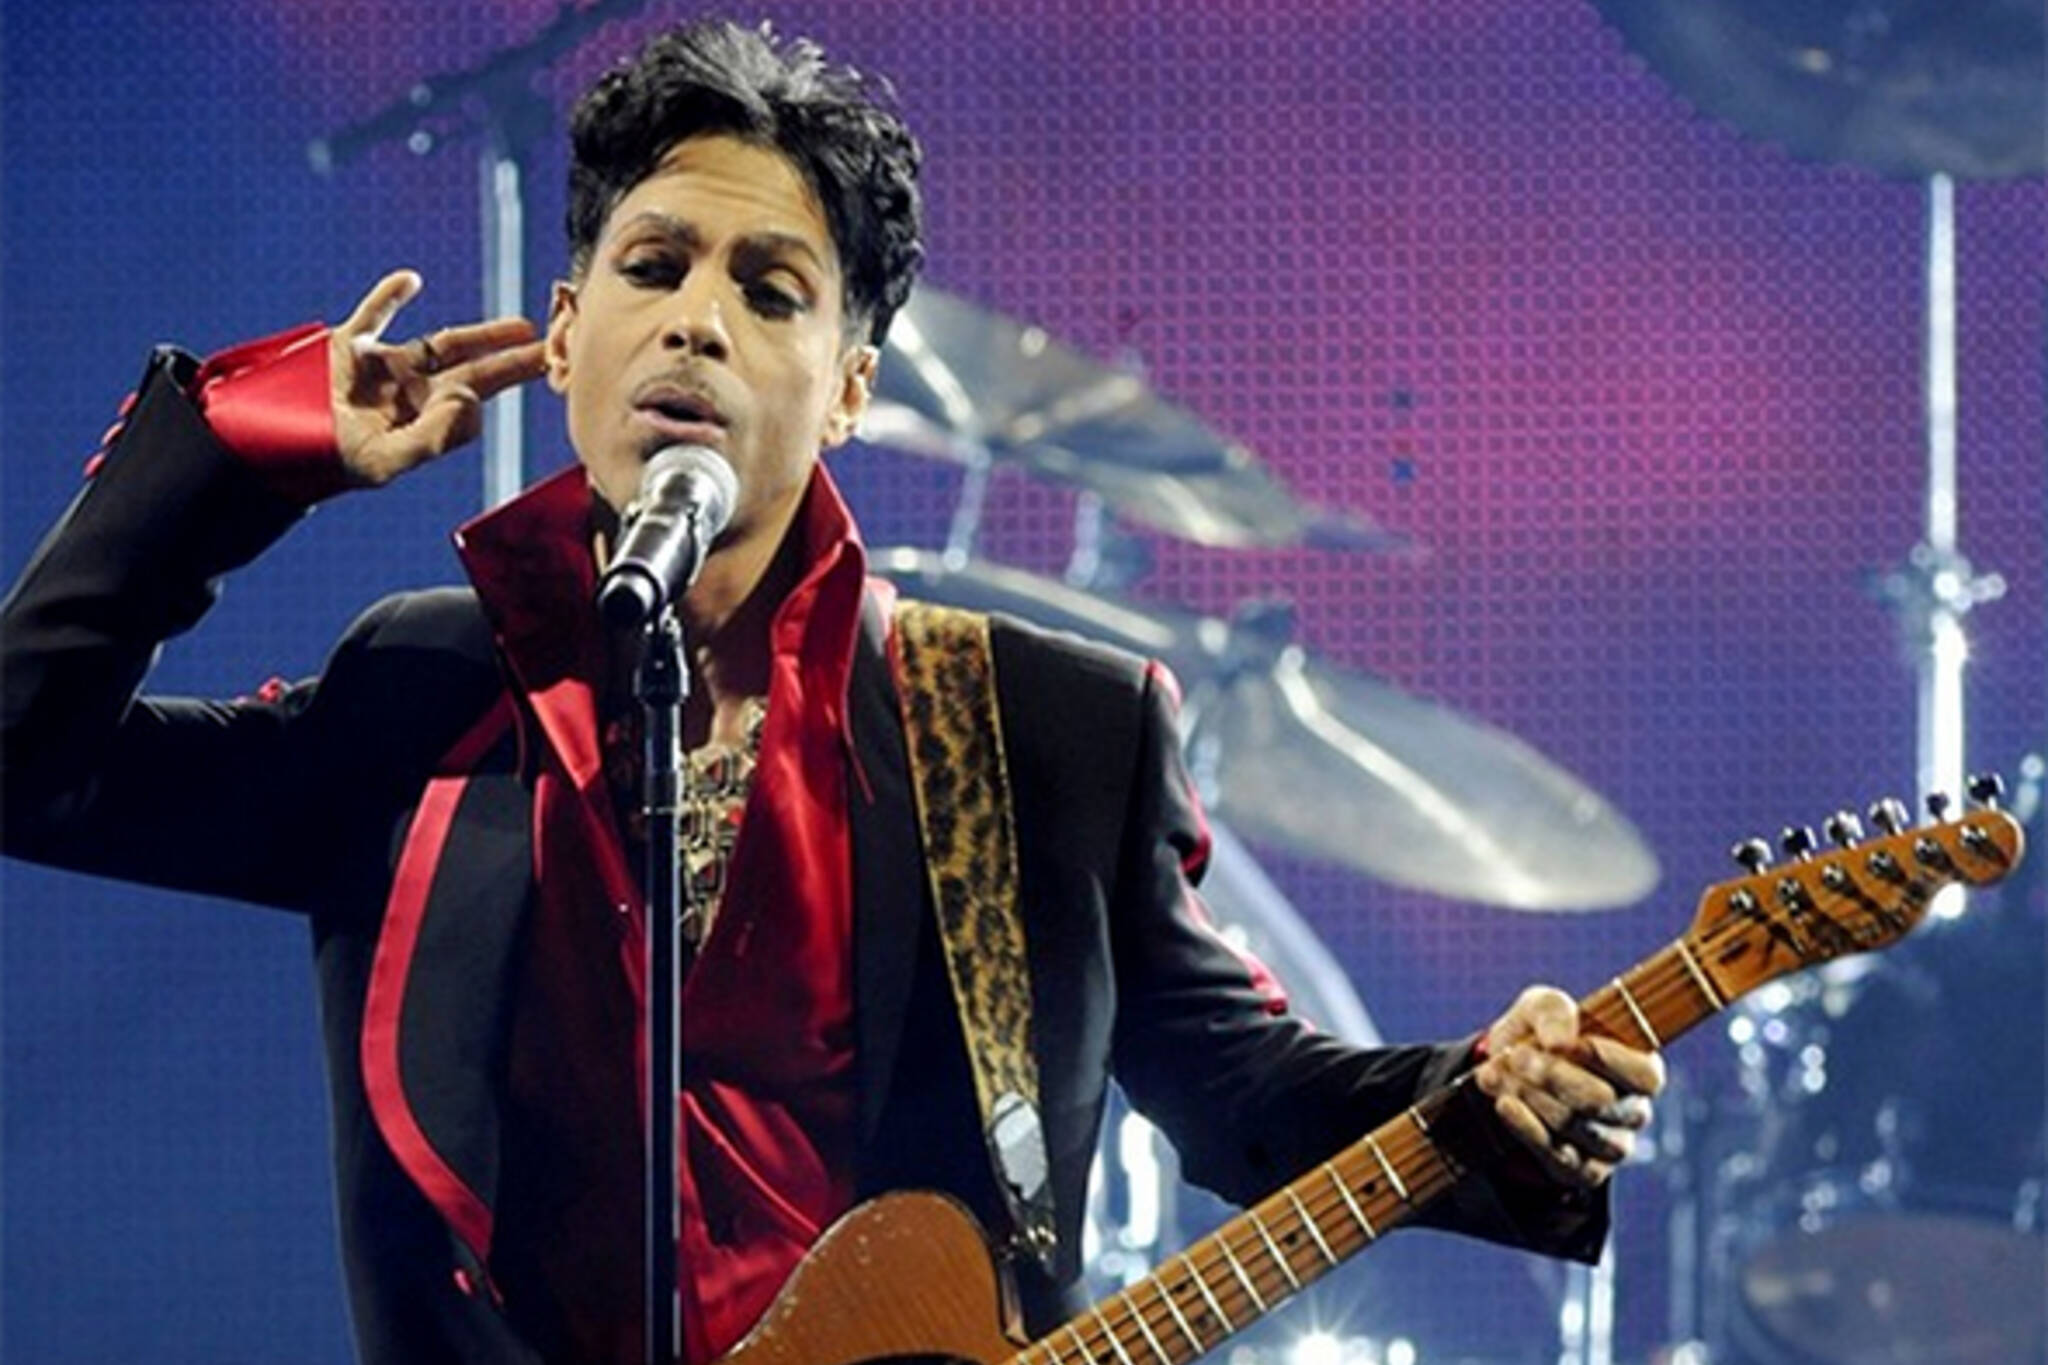 Tickets for surprise Toronto Prince concert on sale today